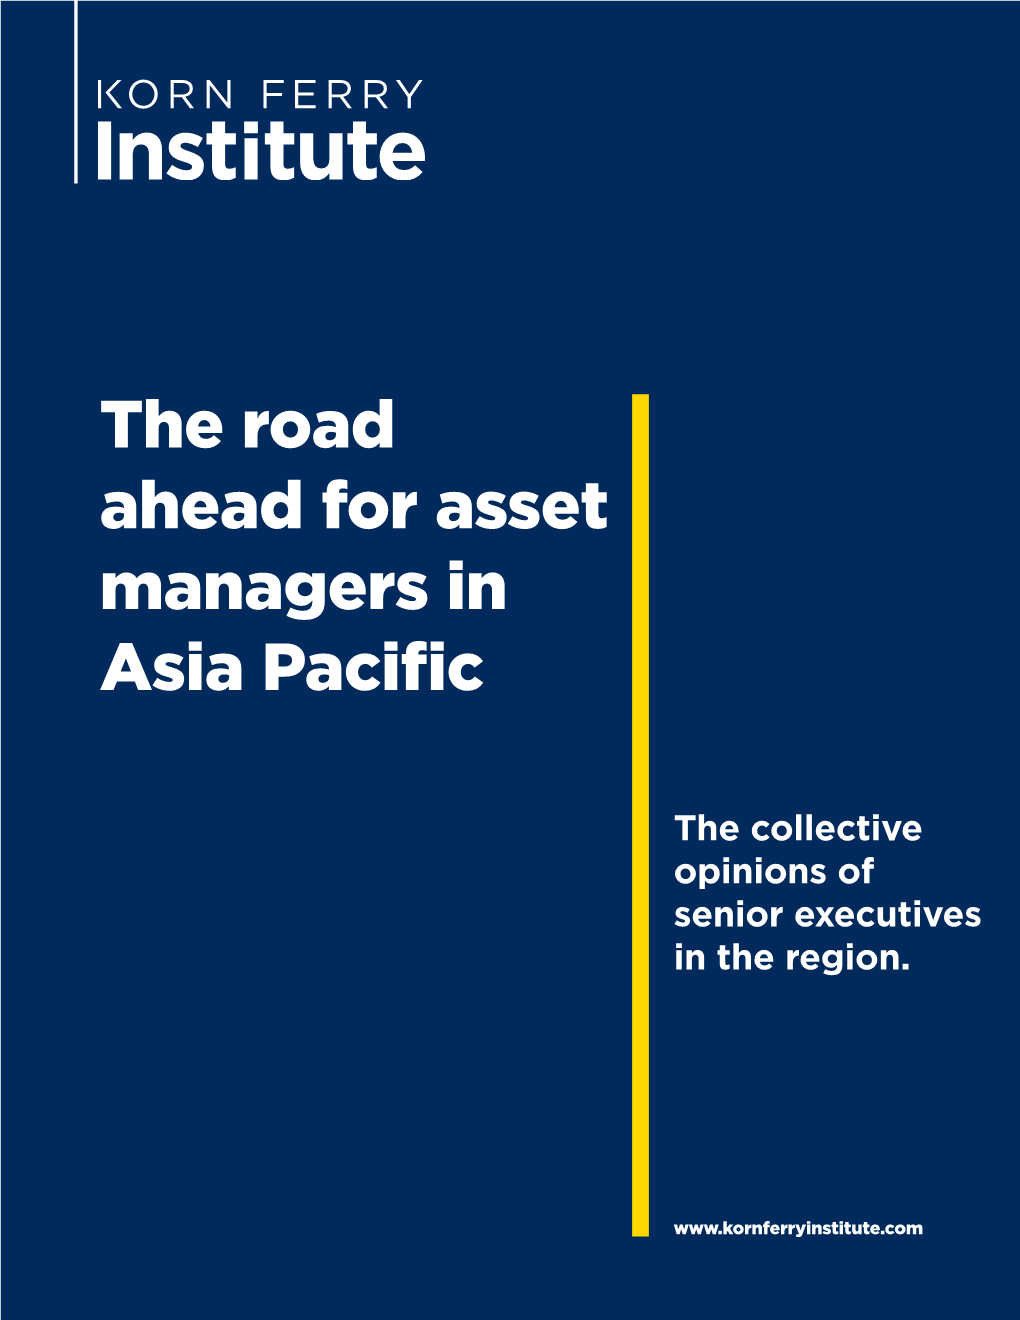 The Road Ahead for Asset Managers in Asia Pacific